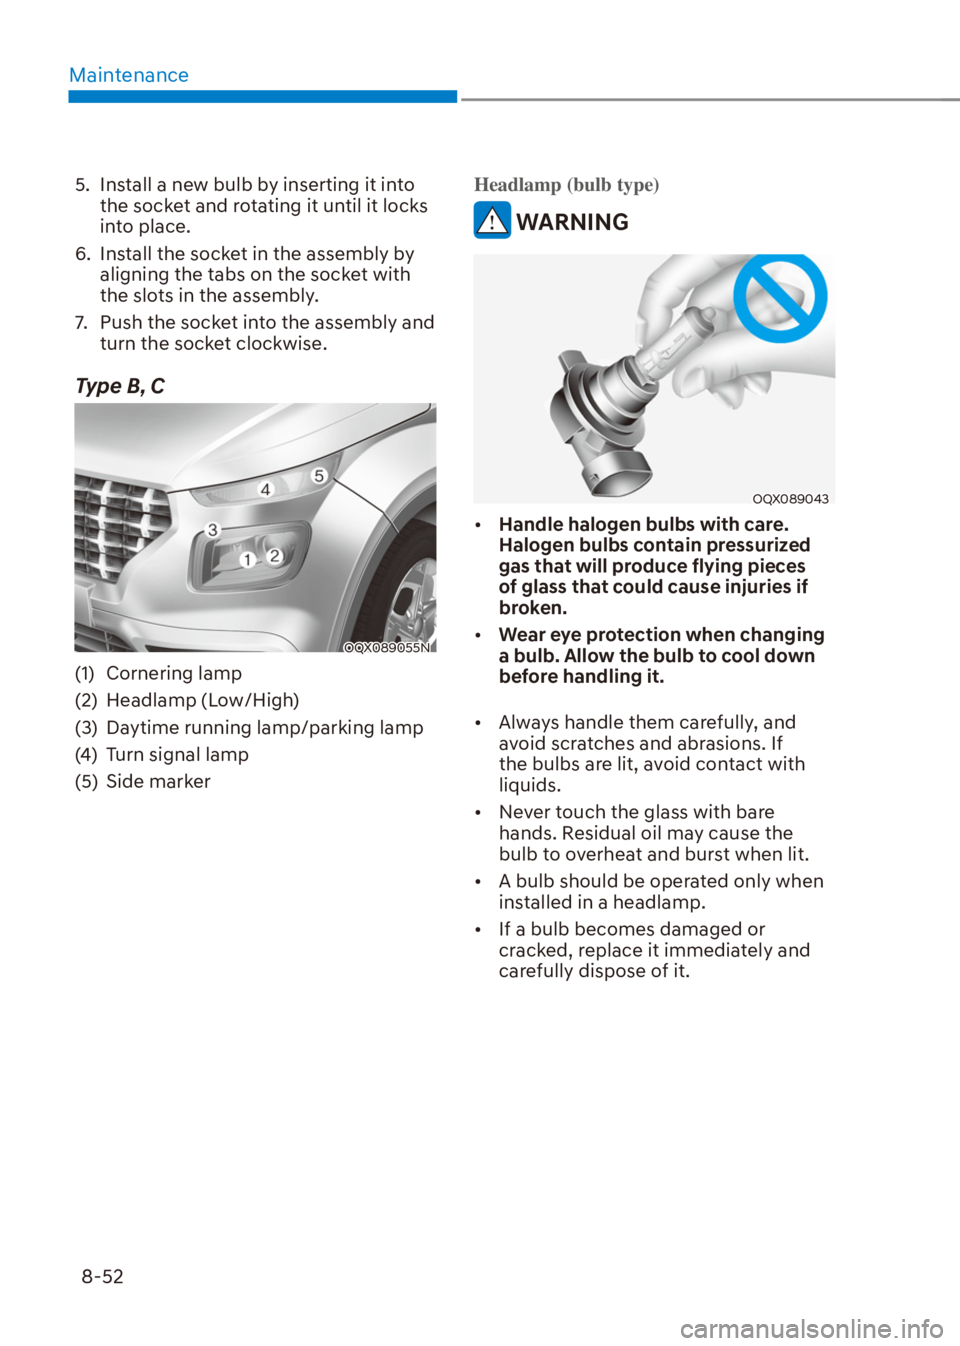 HYUNDAI VENUE 2021  Owners Manual Maintenance
8-52
5.  Install a new bulb by inserting it into 
the socket and rotating it until it locks 
into place.
6.  Install the socket in the assembly by 
aligning the tabs on the socket with 
th